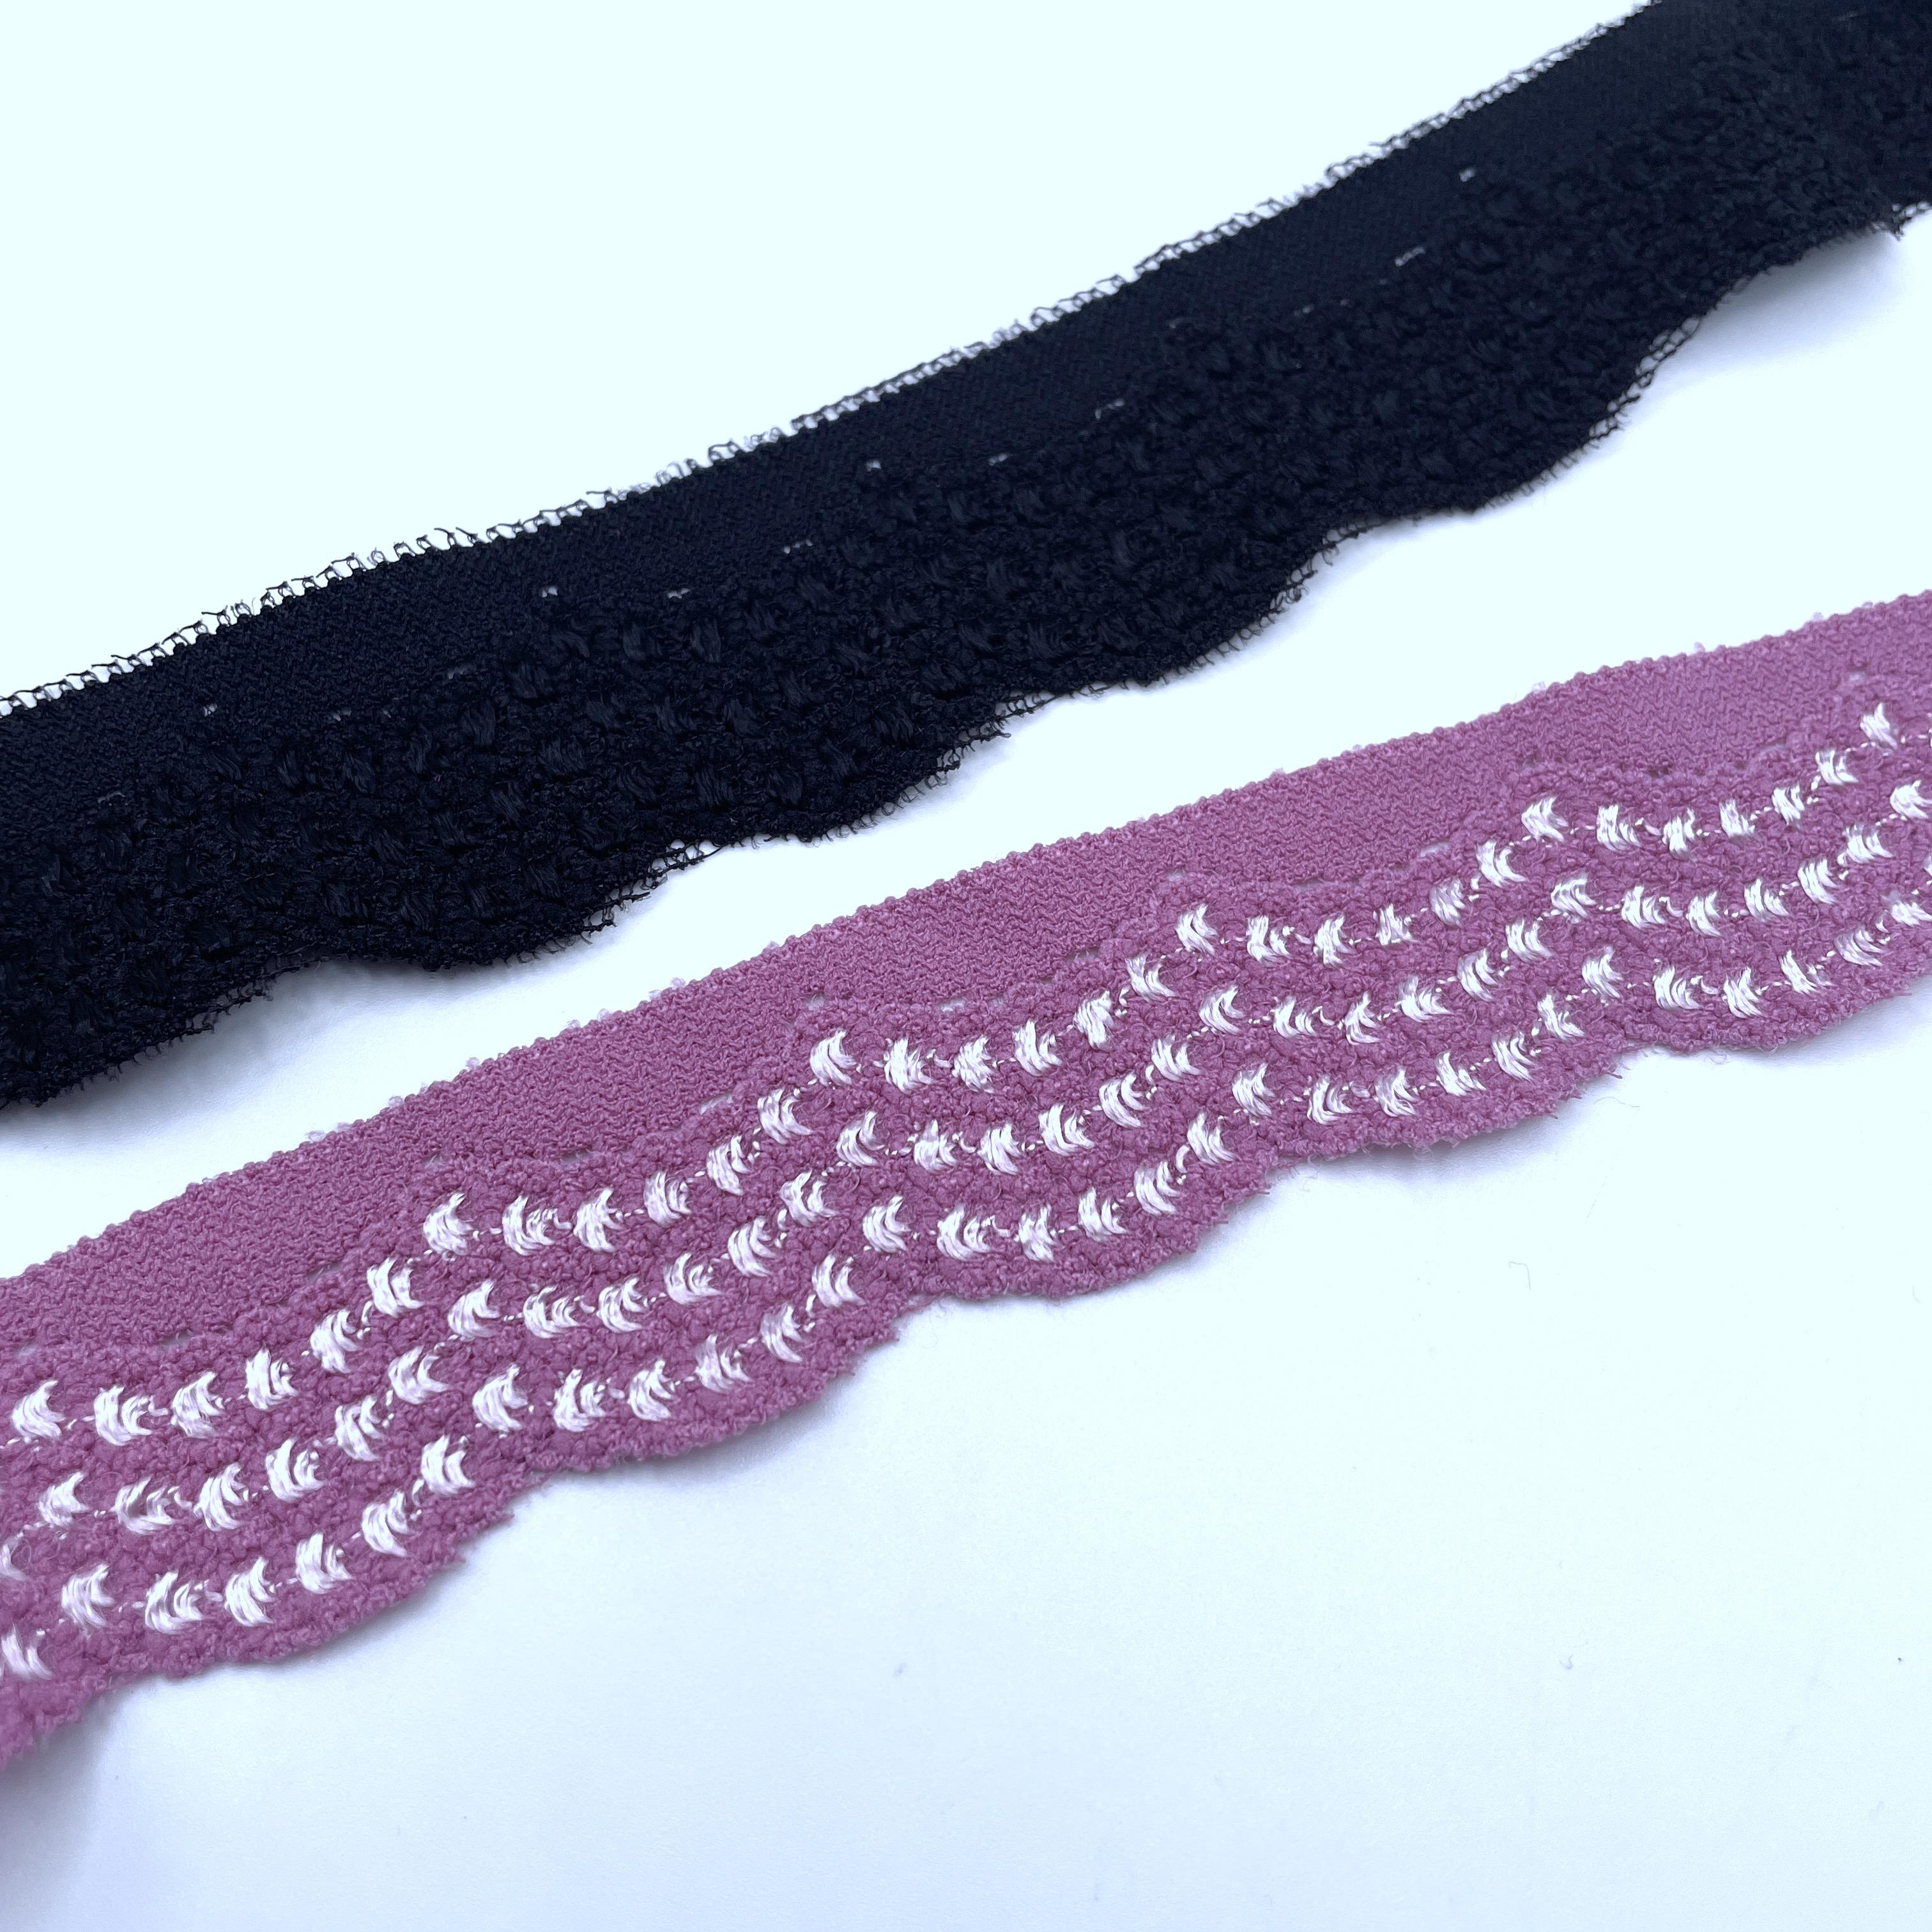 Stretch Lace - straight top/scallop edge - 30mm wide (1 3/16') - 2.5 metre  length Colour Options